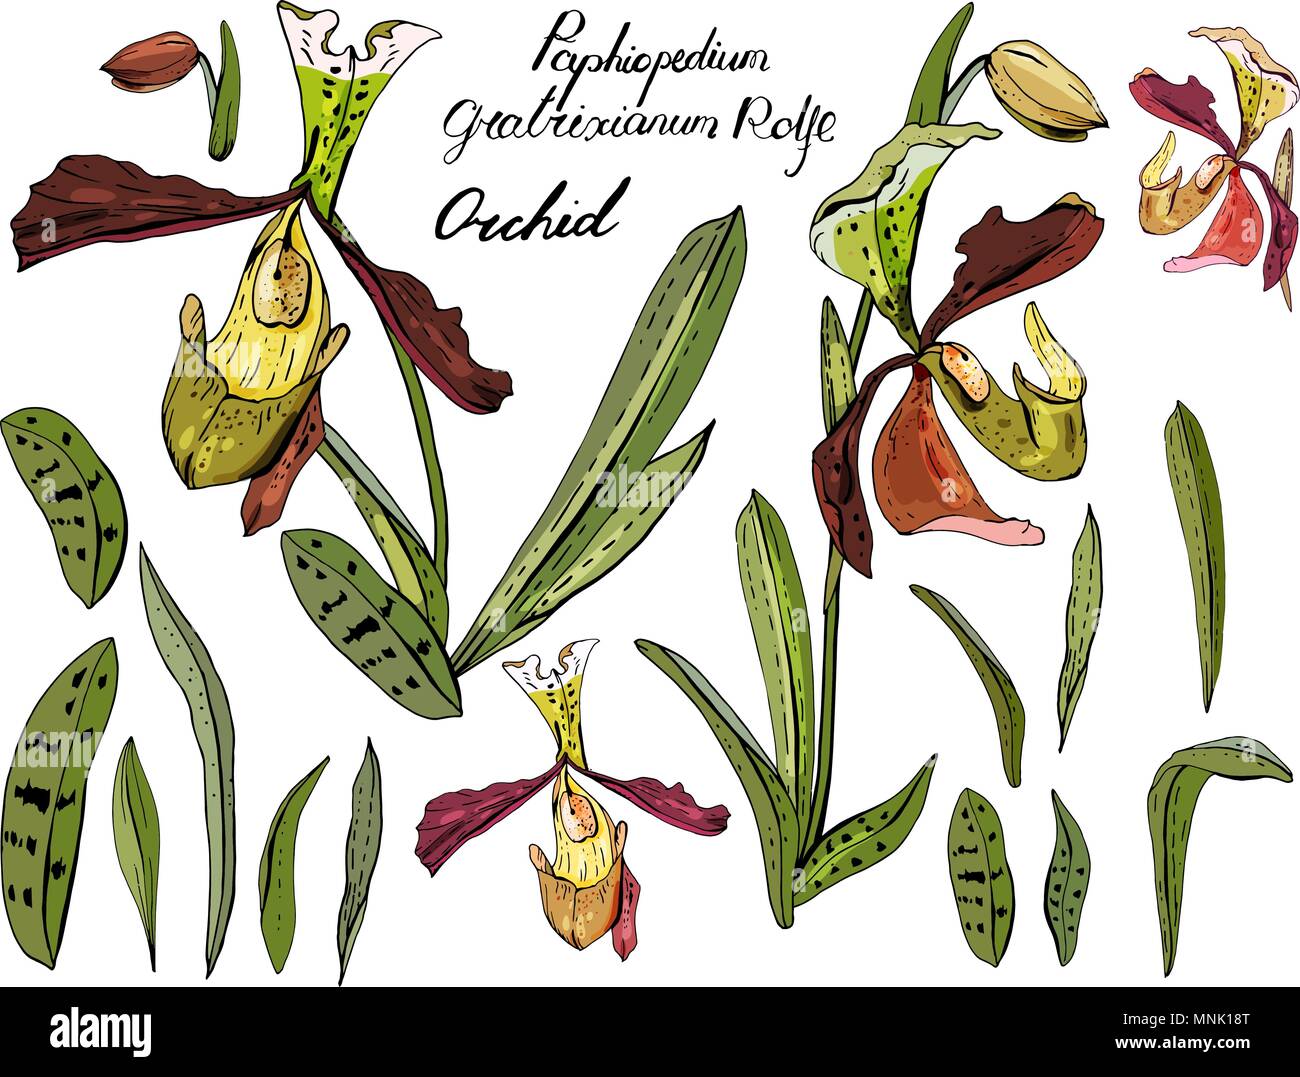 Isolated orchid paphiopedilum on white. Stock Vector